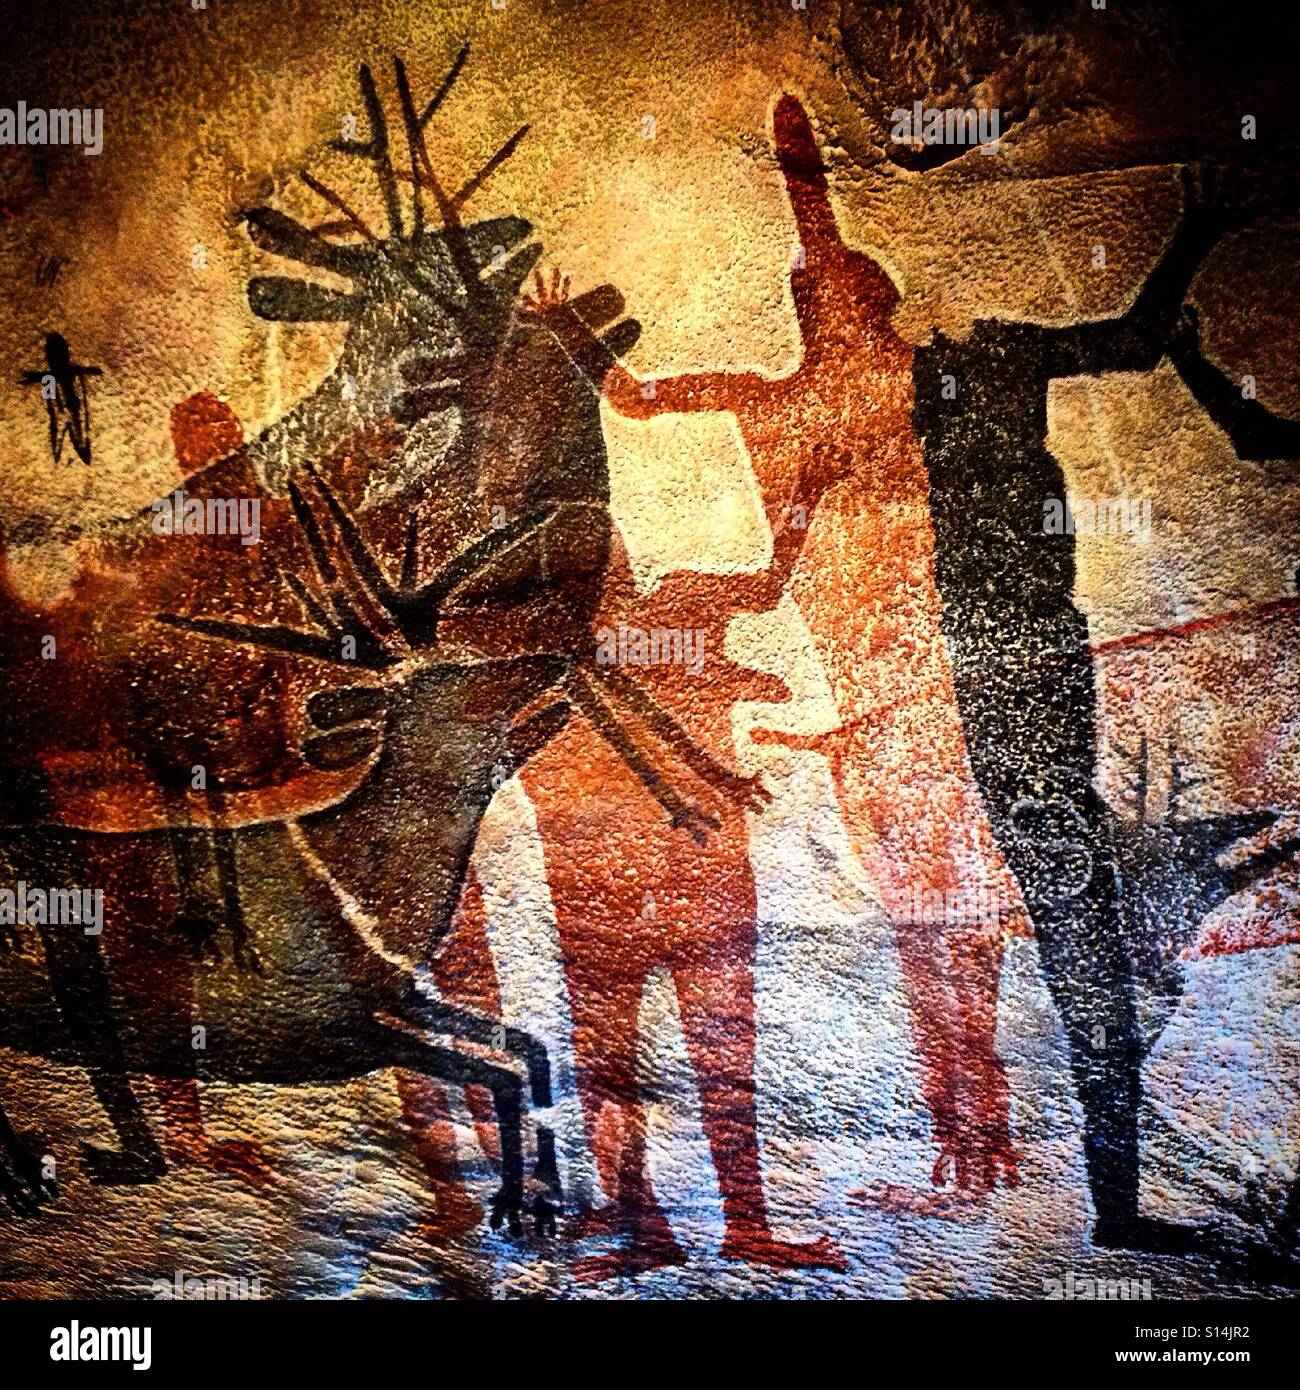 A reproduction of the deer and black&red men from the caves of the San Francisco Sierra in Baja California is displayed in Museo Nacional de Antropologia museum in Mexico City, Mexico Stock Photo